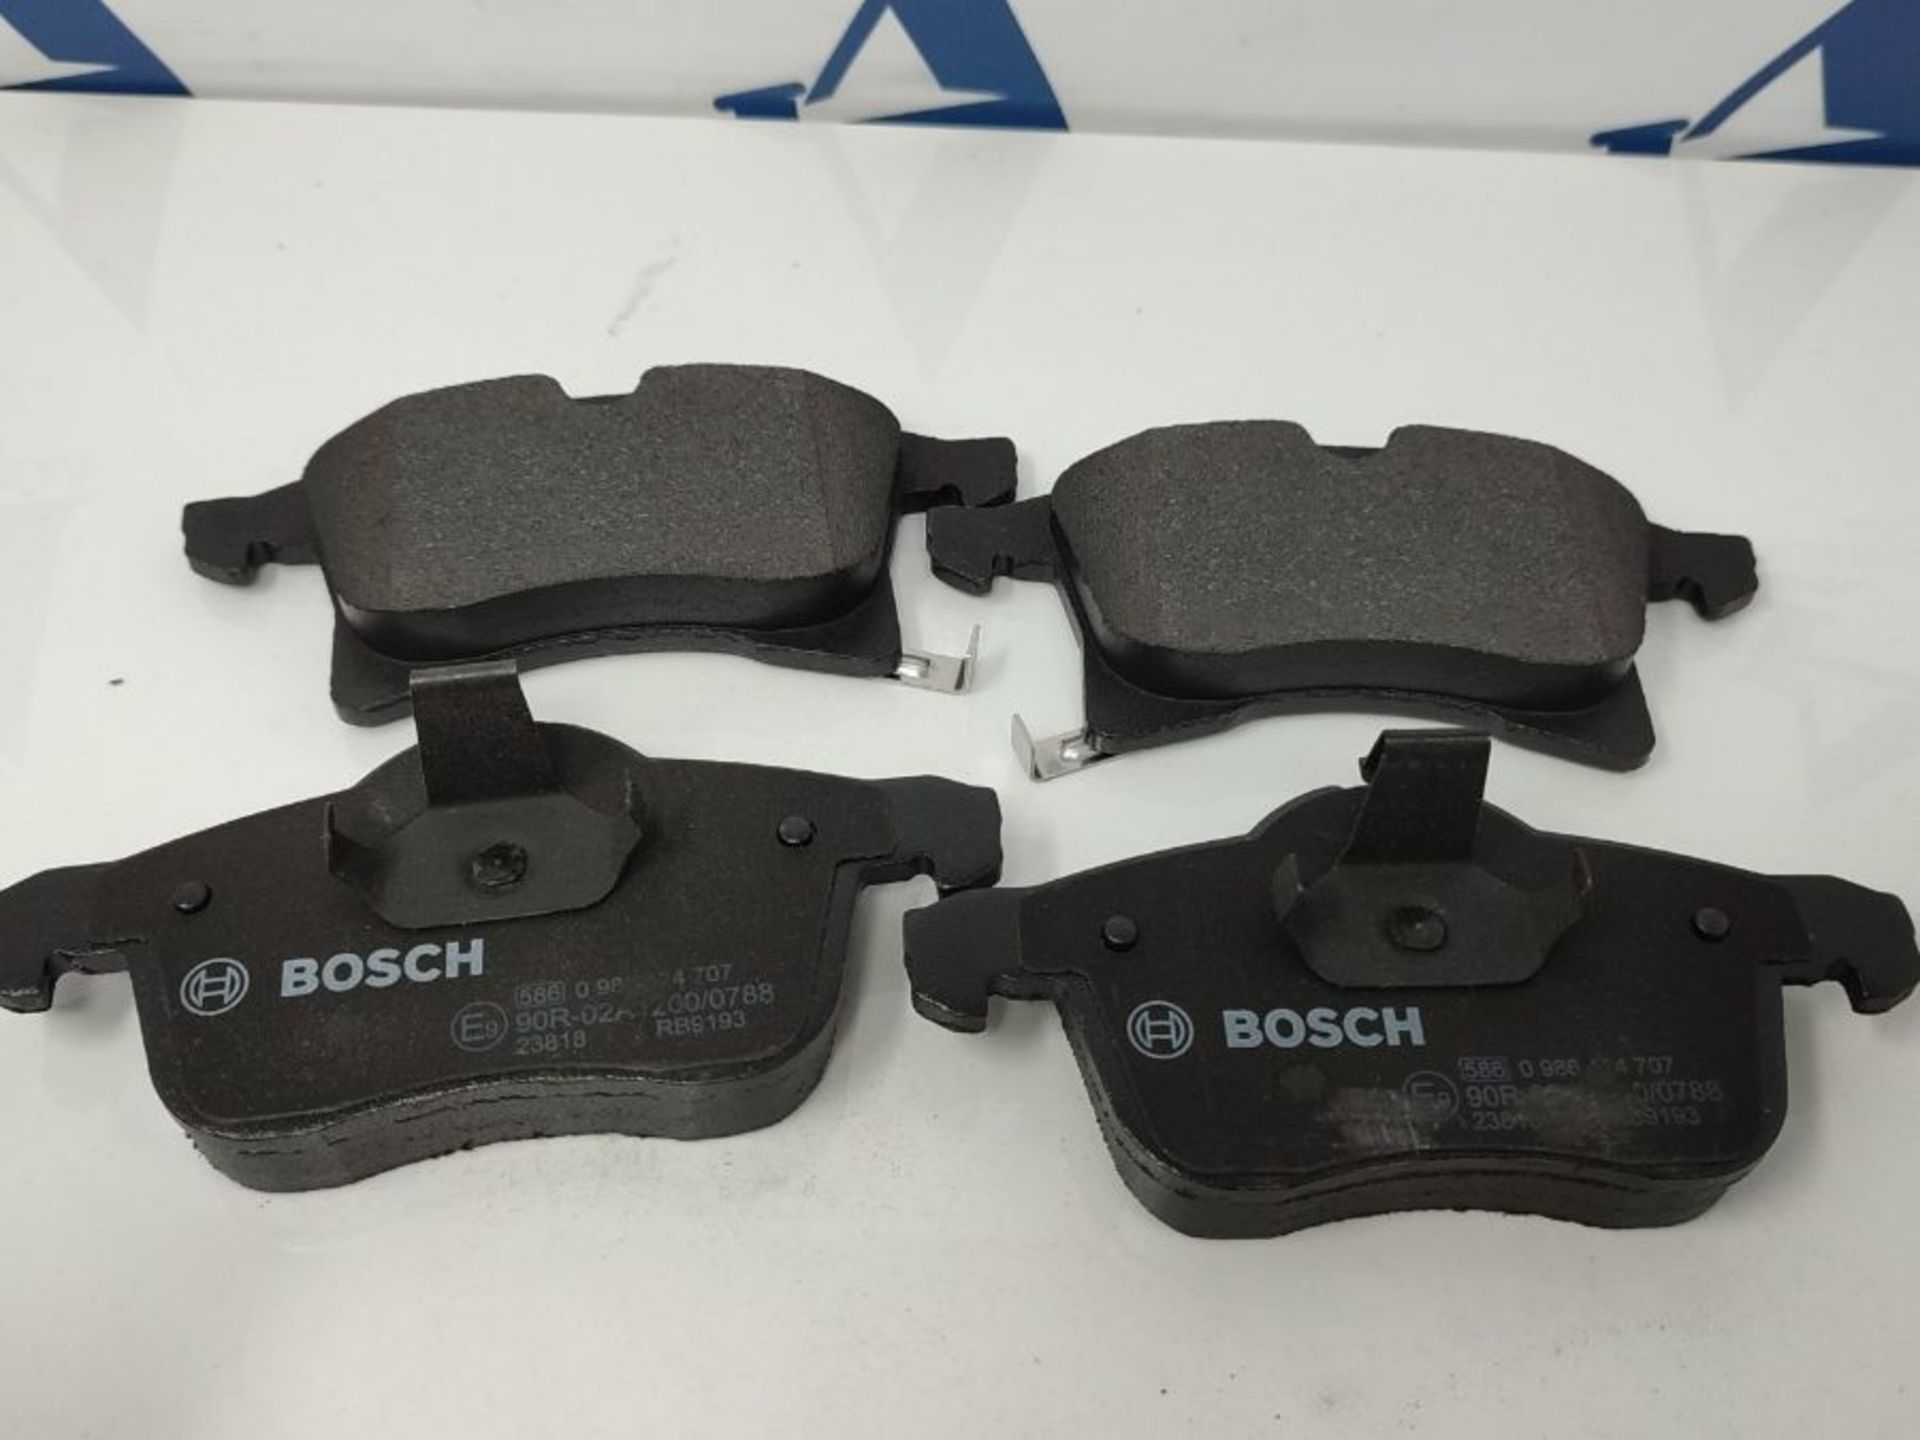 Bosch BP420 Brake Pads - Front Axle - ECE-R90 Certified - 1 Set of 4 Pads - Image 6 of 6